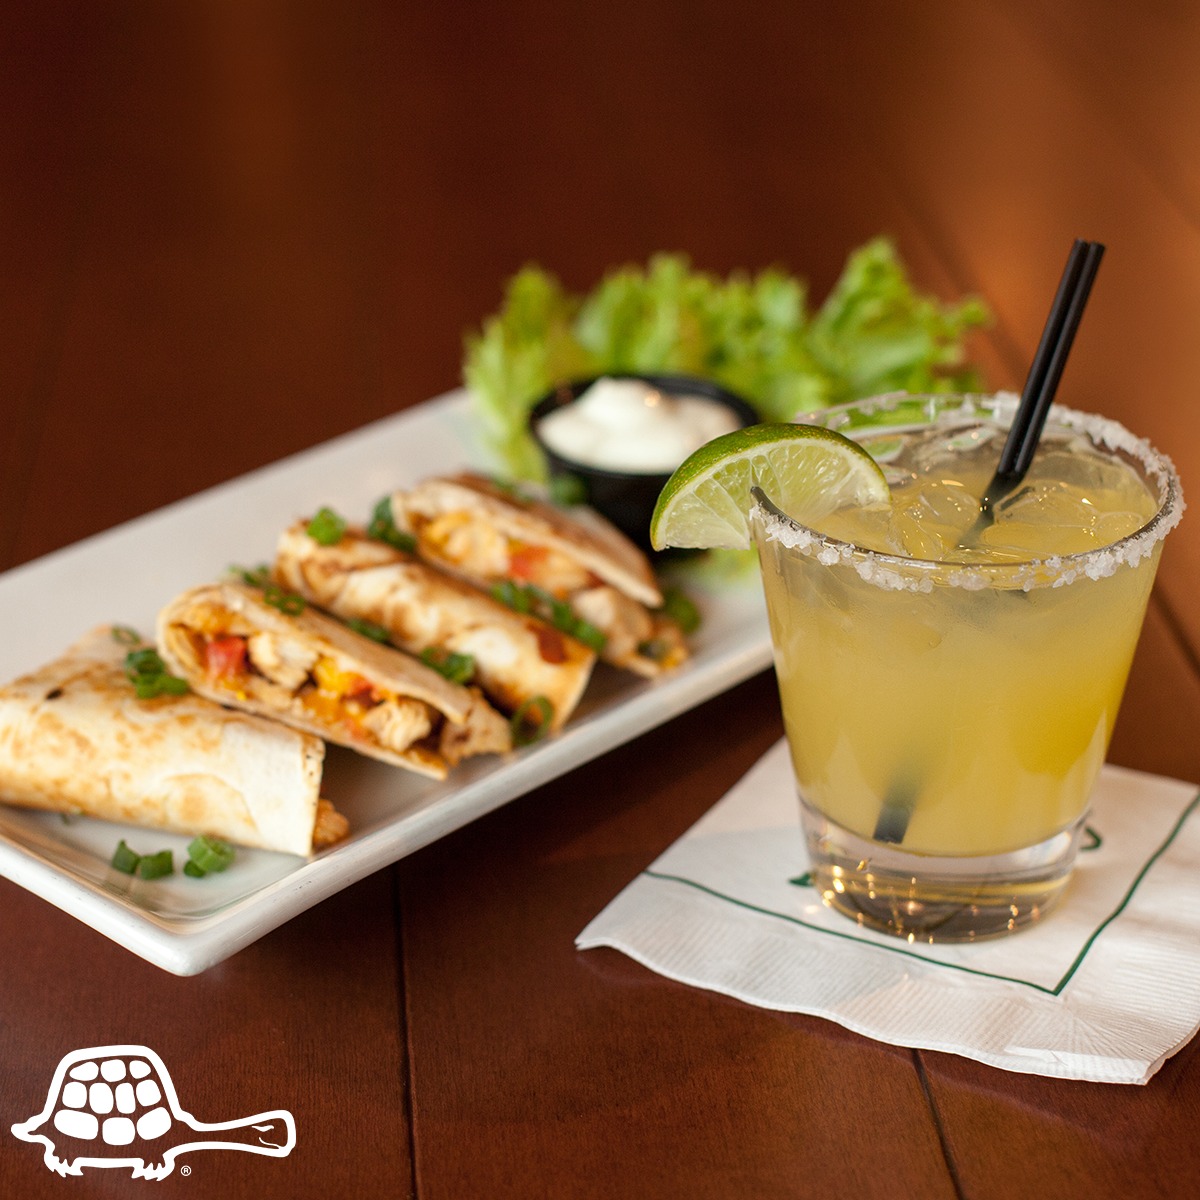 A quesadilla and a cocktail with a lime wedge